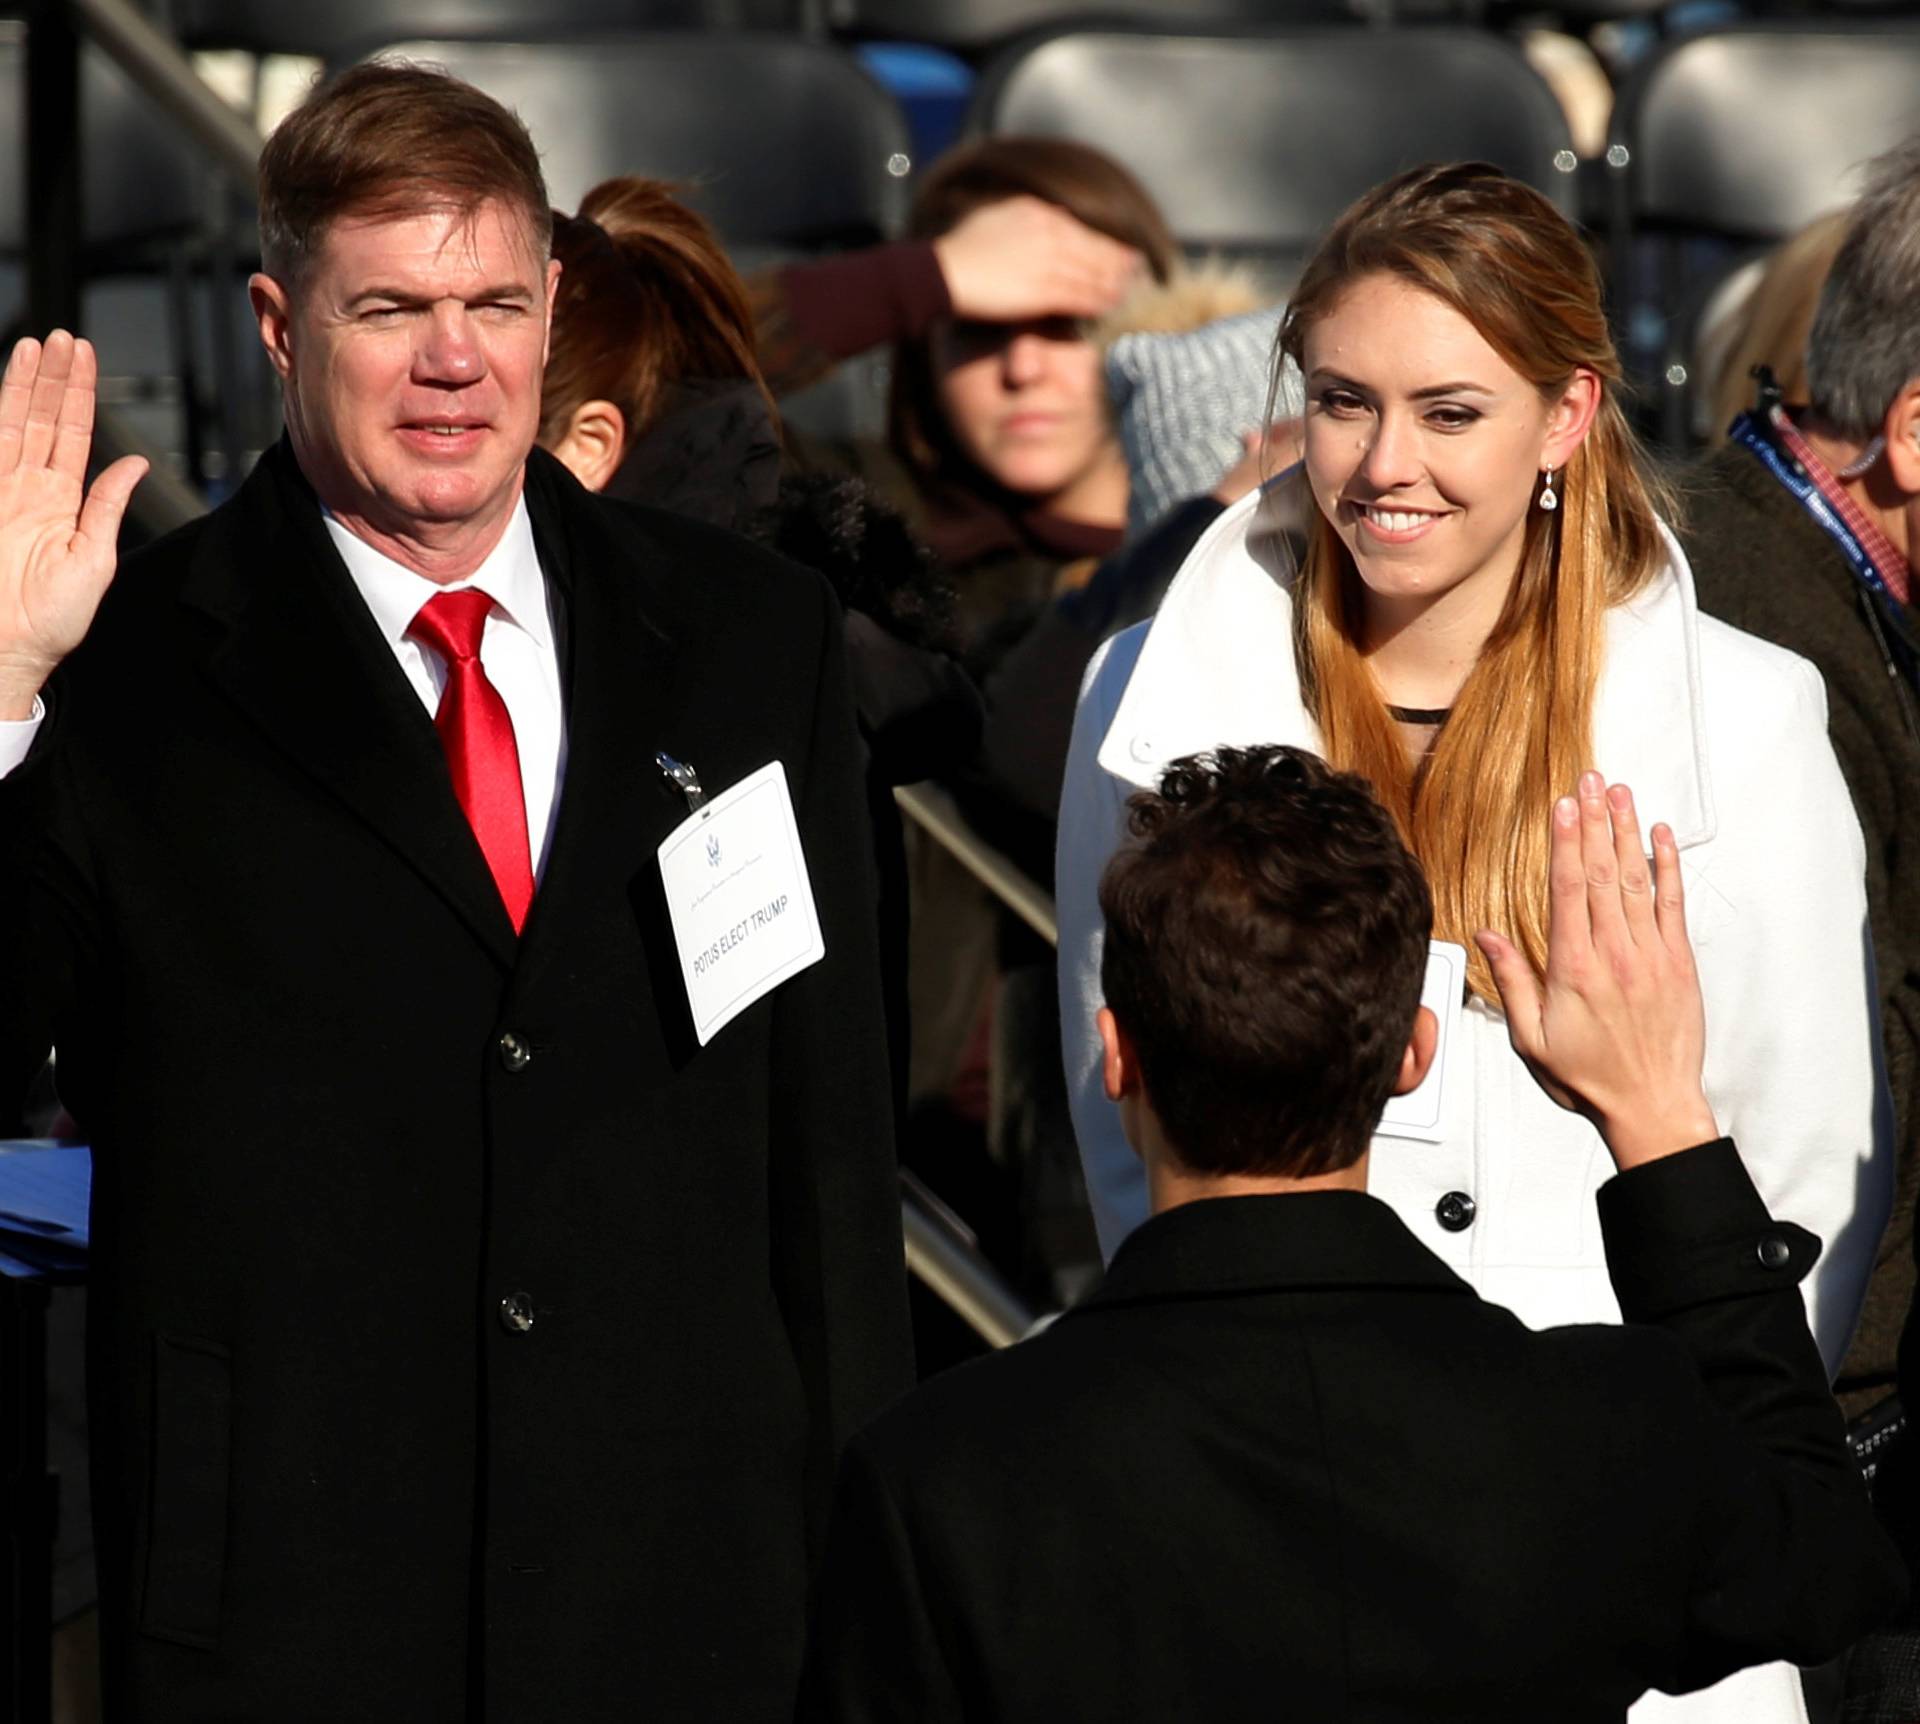 Stand-ins for President-elect Donald Trump and his wife Melania rehearse the swearing-in ceremony portion of the inauguration at the U.S. Capitol in Washington